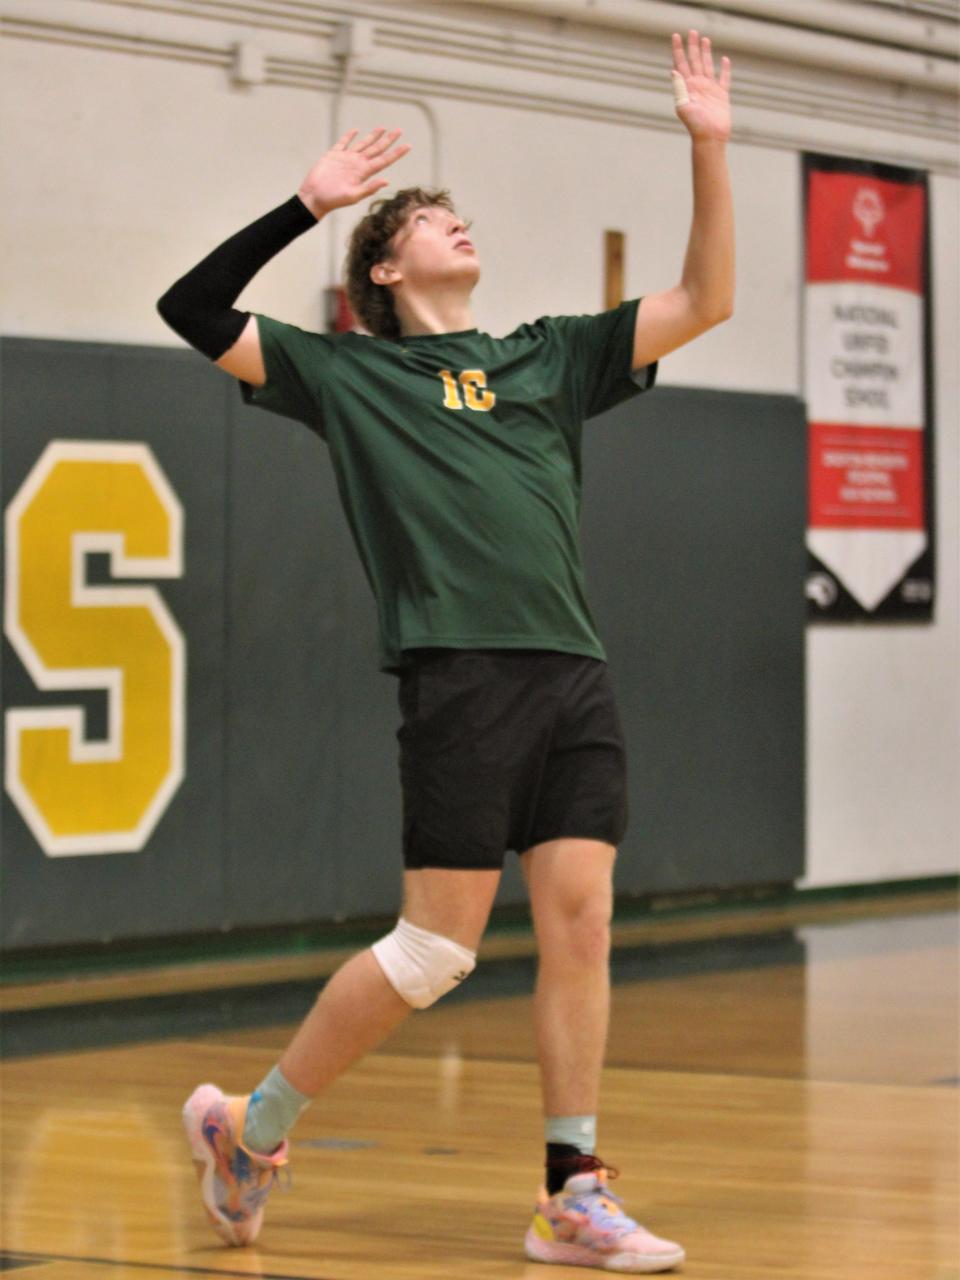 Dighton-Rehoboth's Ian Hoskins prepares to serve during a Tri-Valley League match against Nipmuc on April 17, 2023.